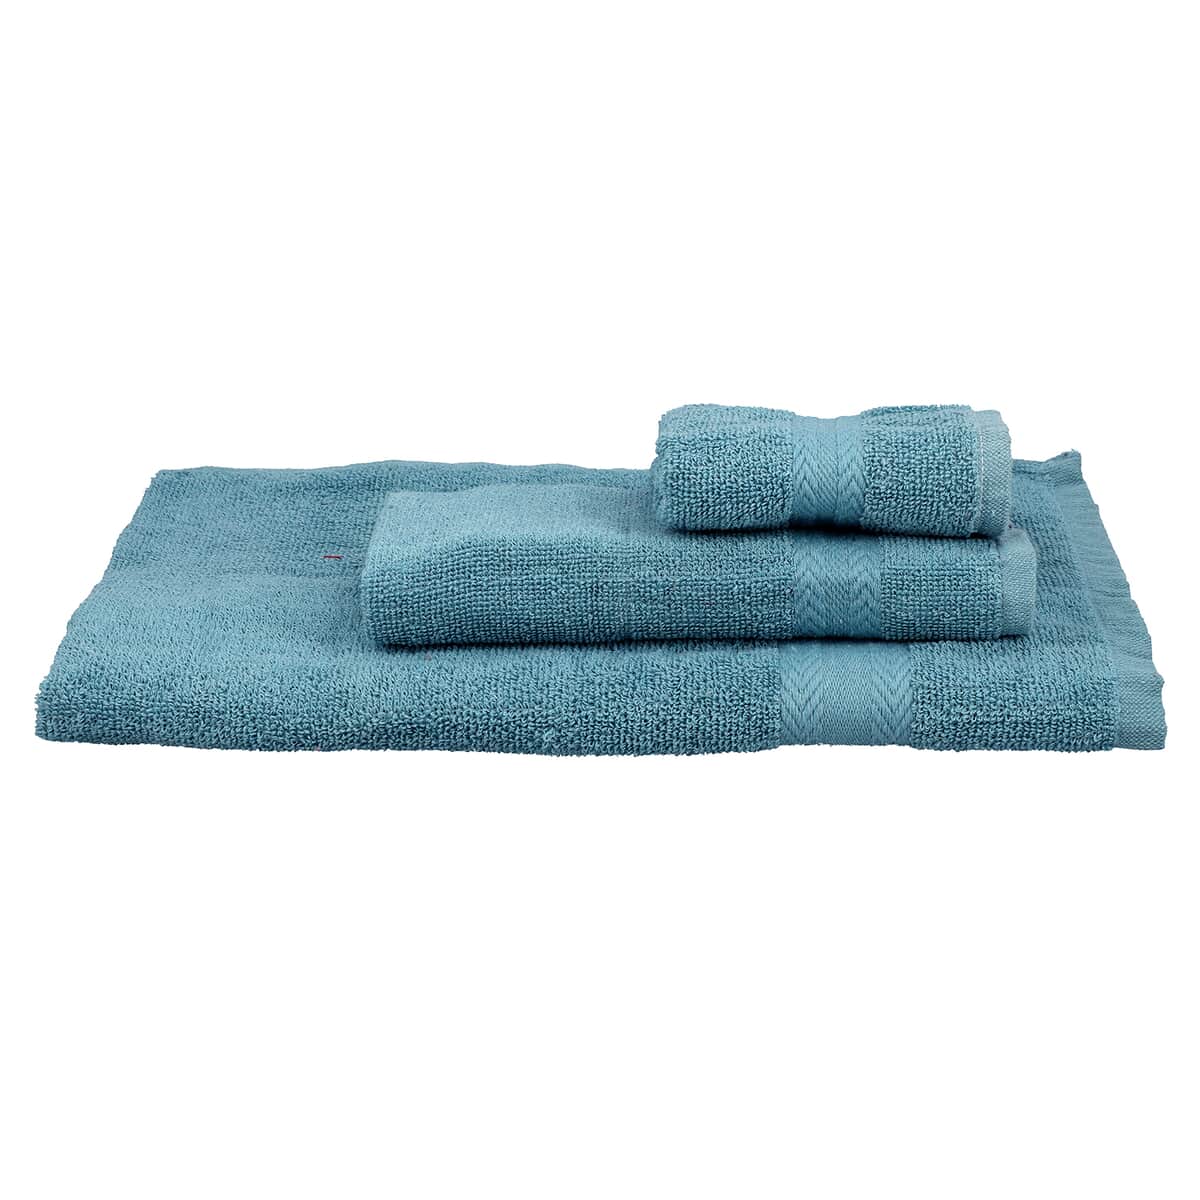 "3 Pc Cotton Towel Set (1 Bath Towel 47x28 in, 1 Hand Towel 20x12 in and 1 Face towel 12x12 inches) COLOR: Mint " image number 0